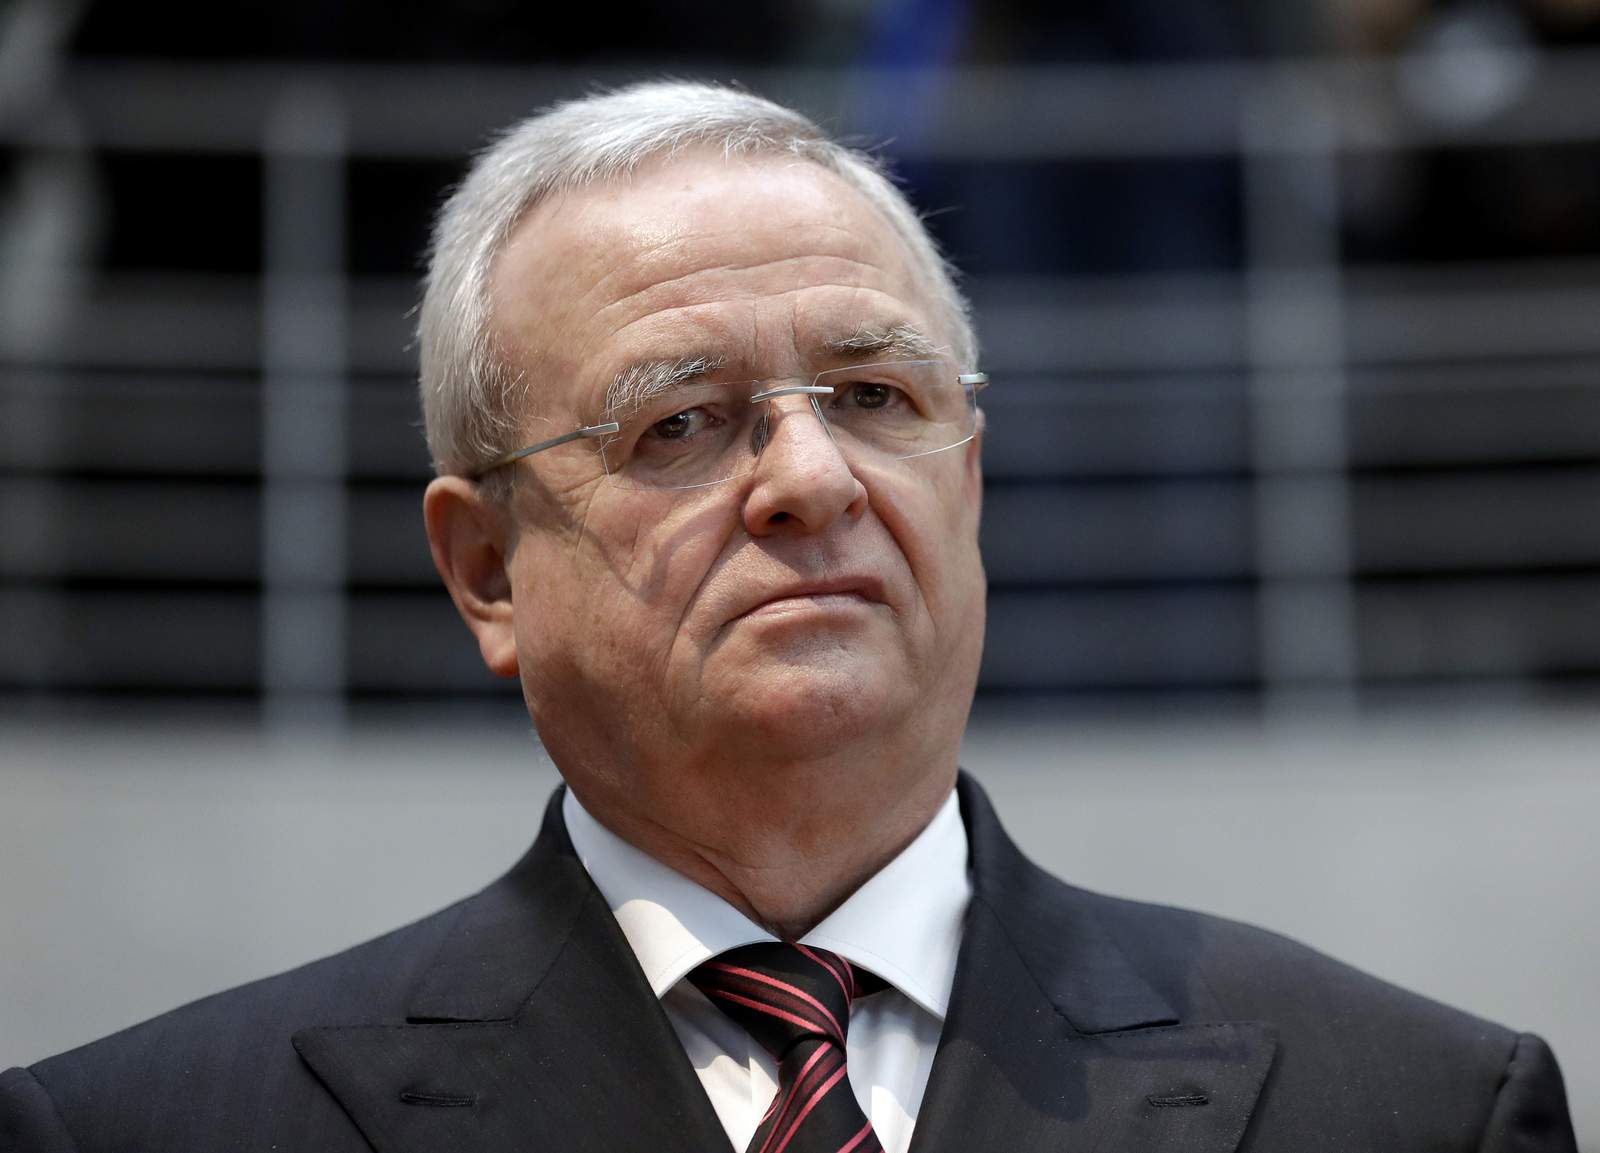 Former VW boss Winterkorn faces trial on 2nd set of charges